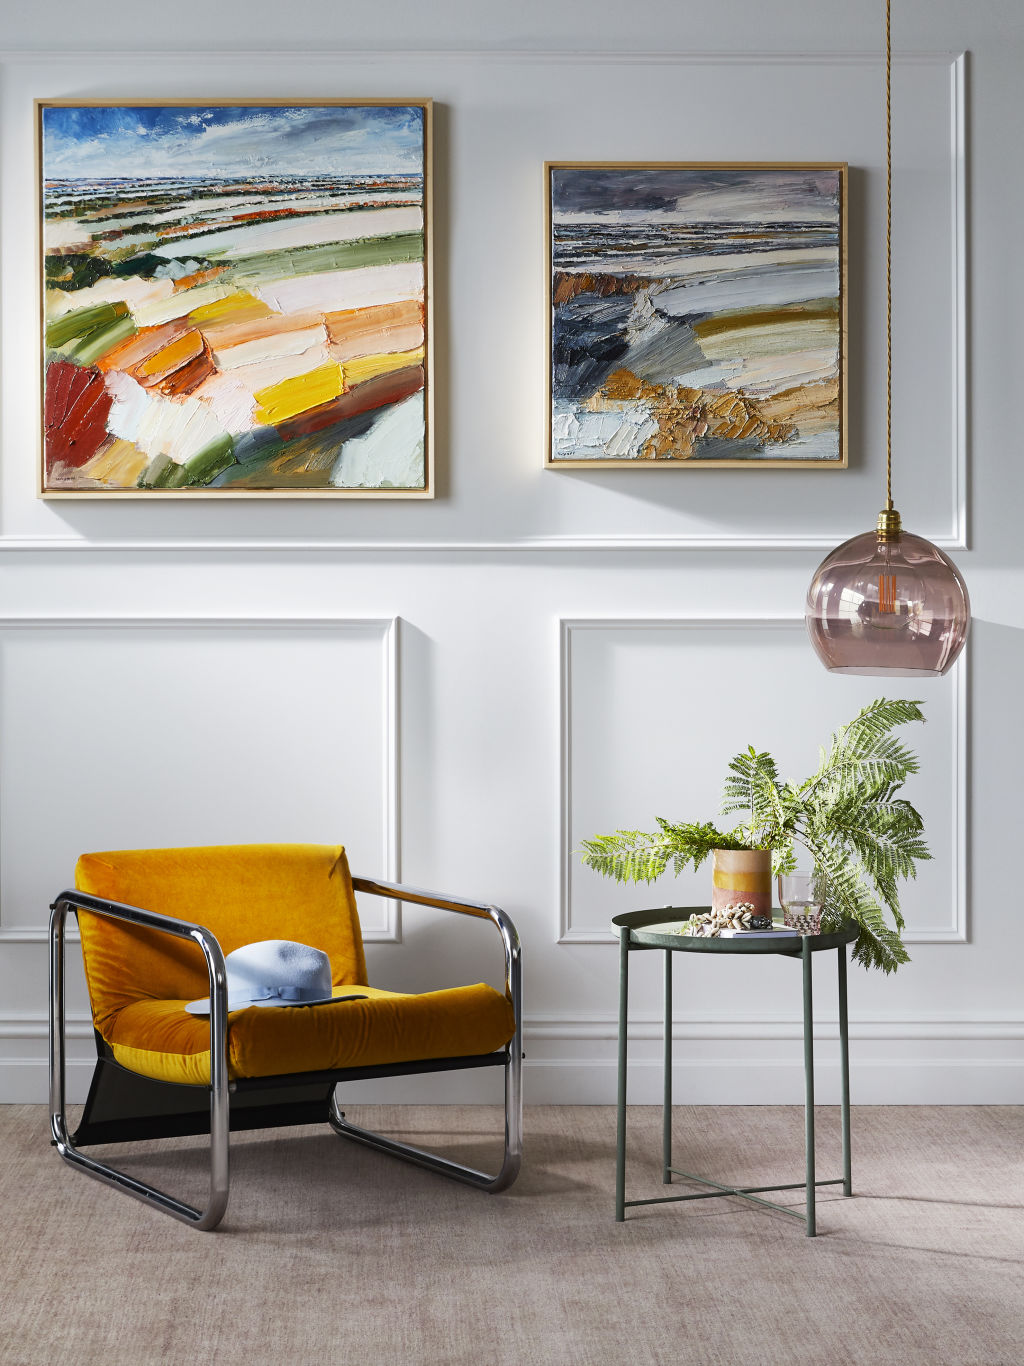 Works by Katie Wyatt, styling by Julia Green for Greenhouse Interiors. Photo: Armelle Habib.